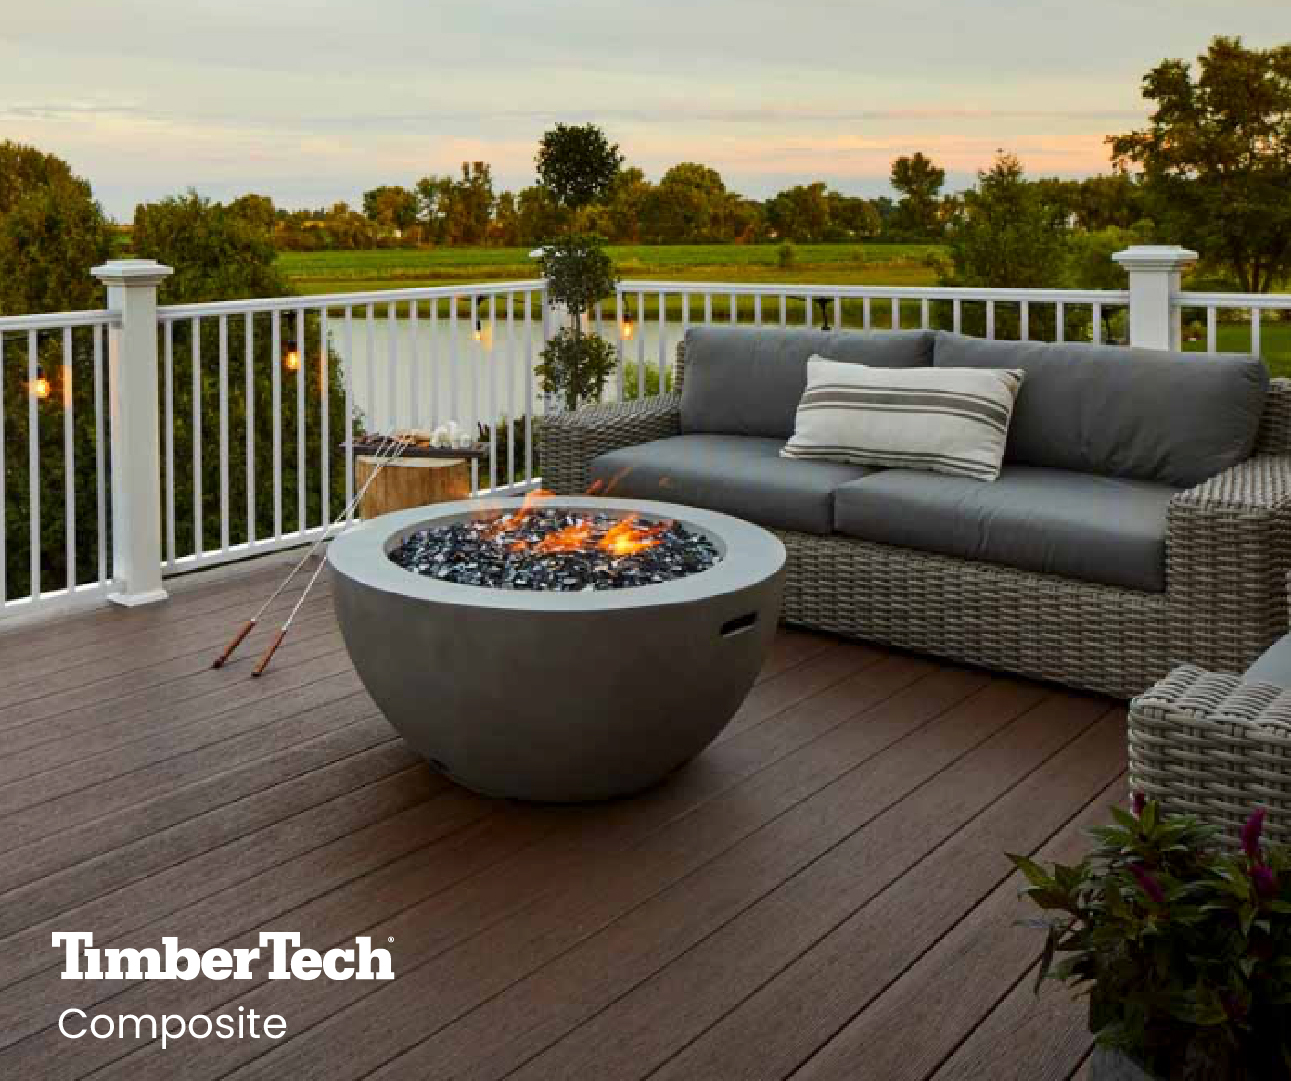 A finished, dark brown composite TimberTech deck complete with a fire pit and gray outdoor furniture.